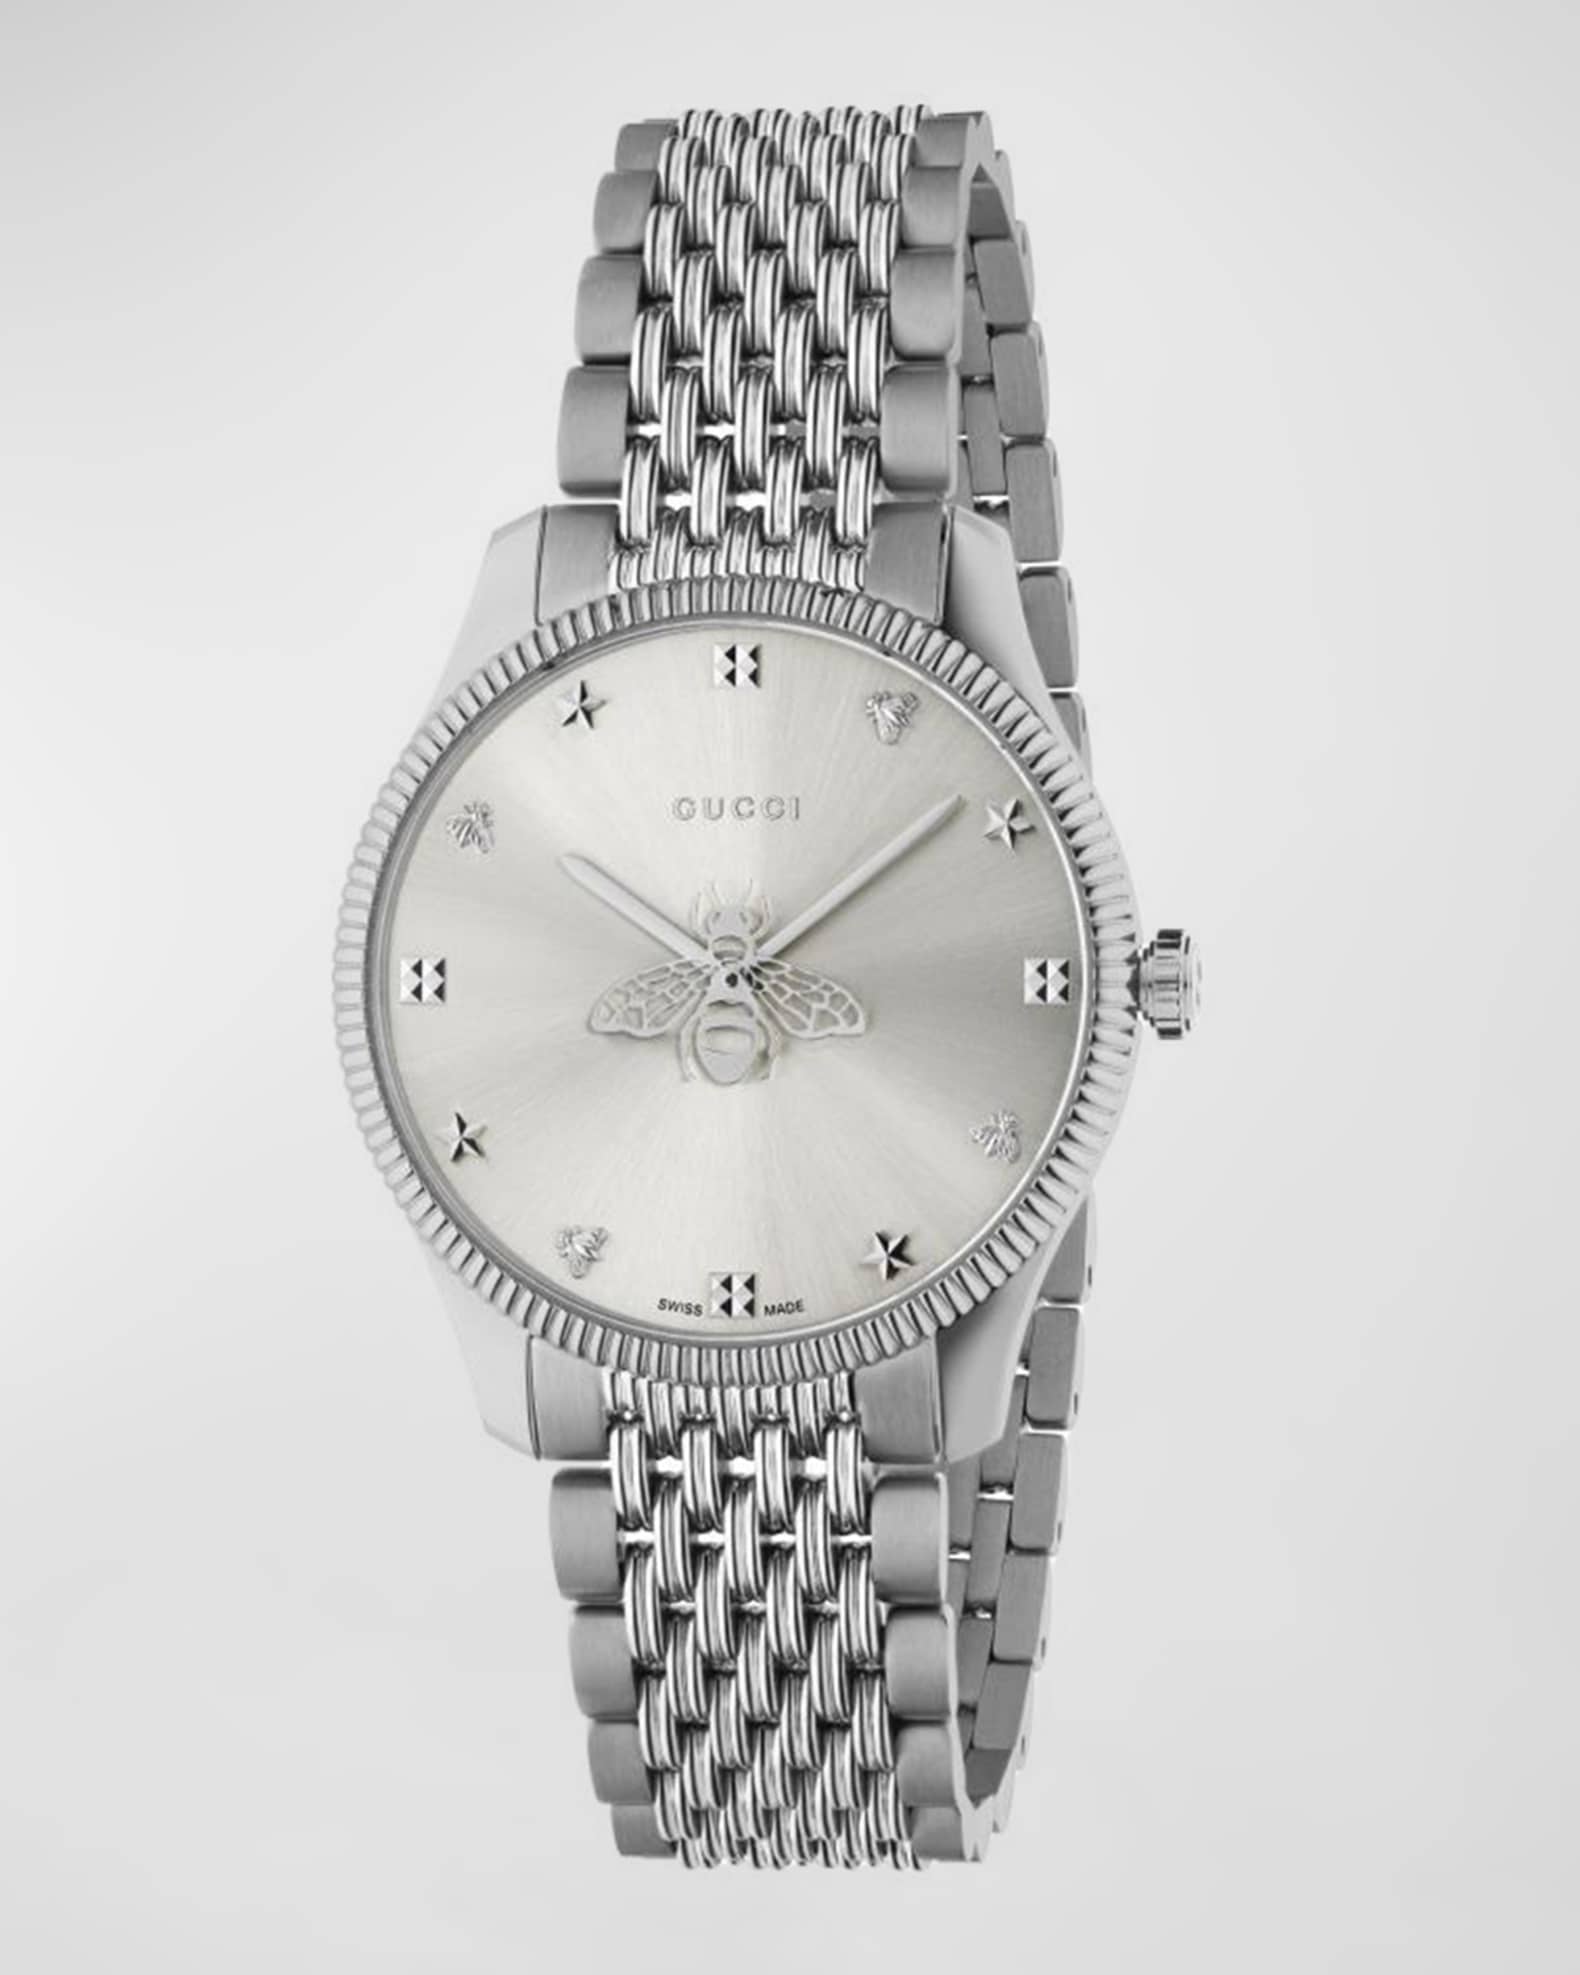 Gucci G-Timeless 27mm Watch in Metallic Silver